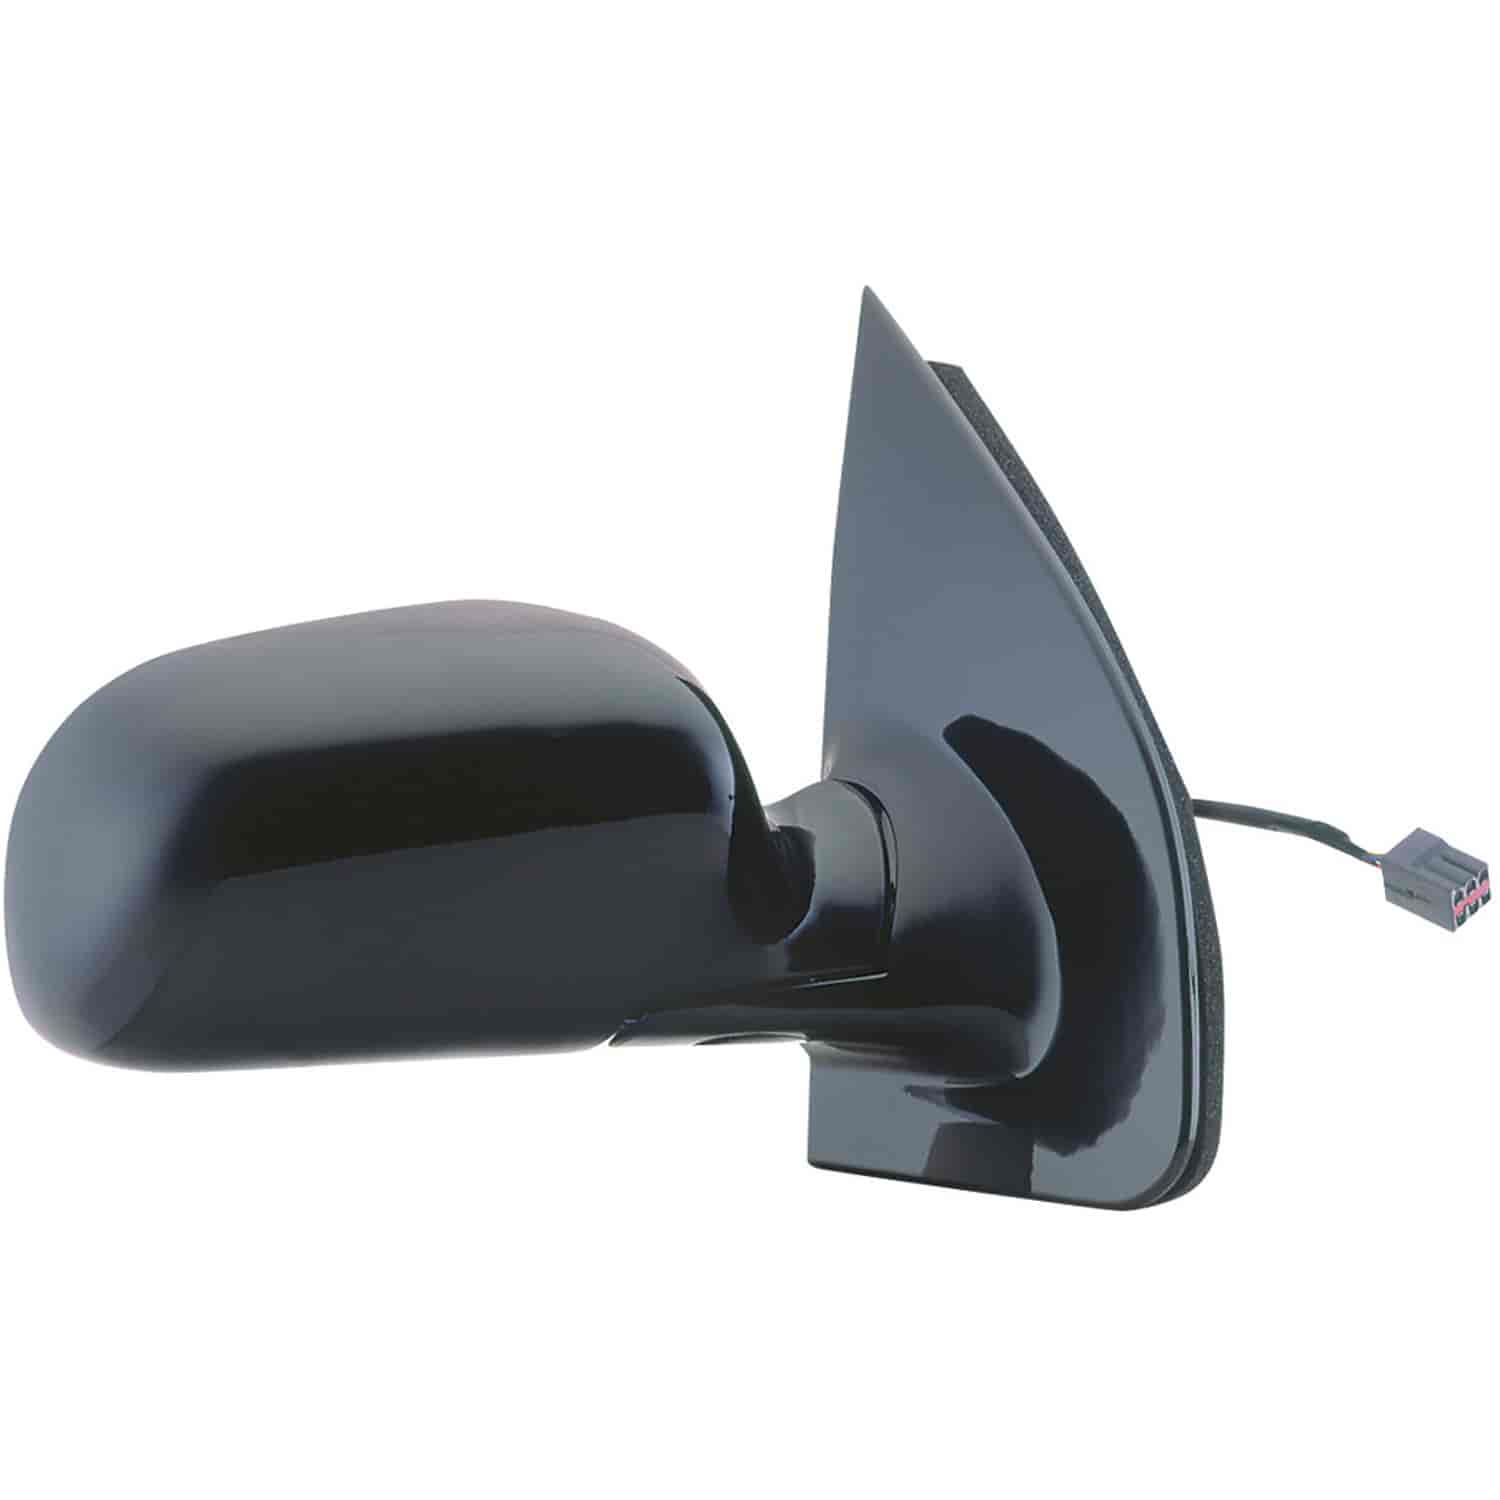 OEM Style Replacement mirror for 99-00 Ford Windstar passenger side mirror tested to fit and functio